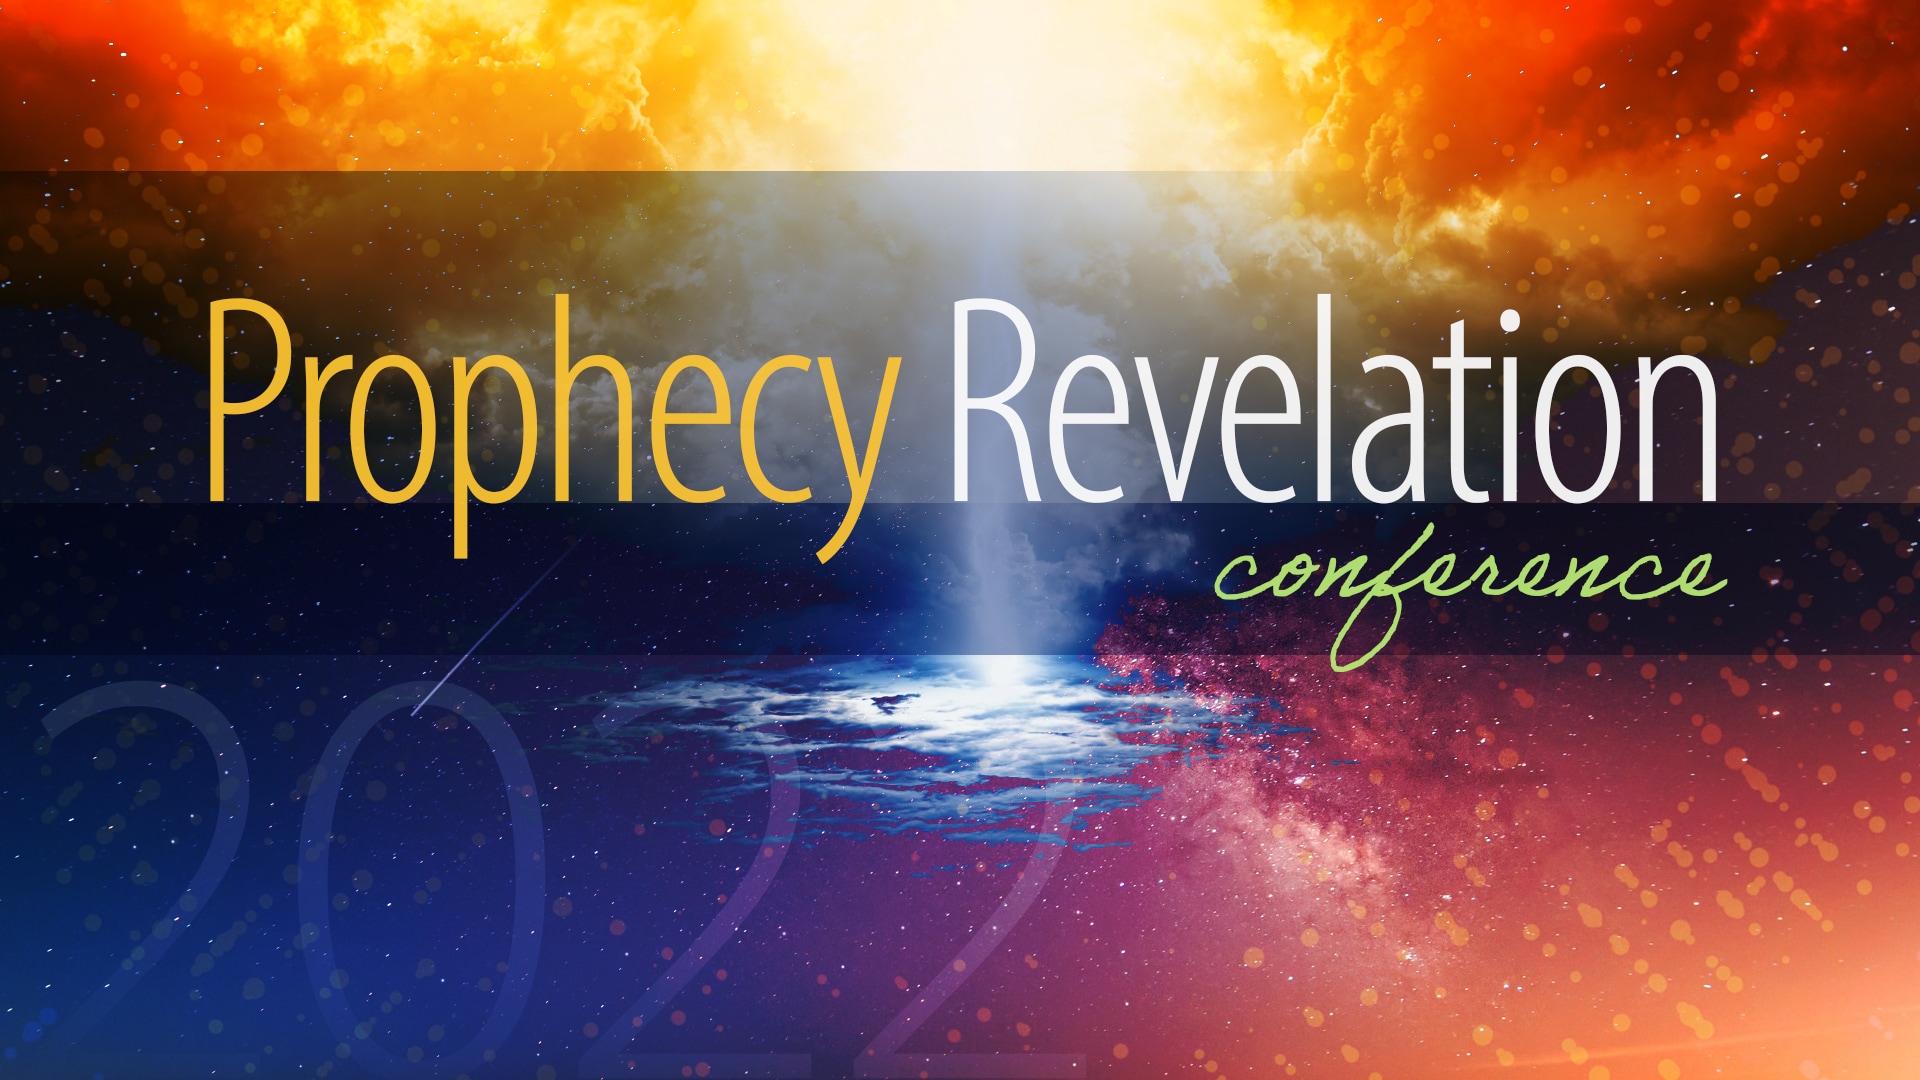 Prophecy Revelation Conference 2022